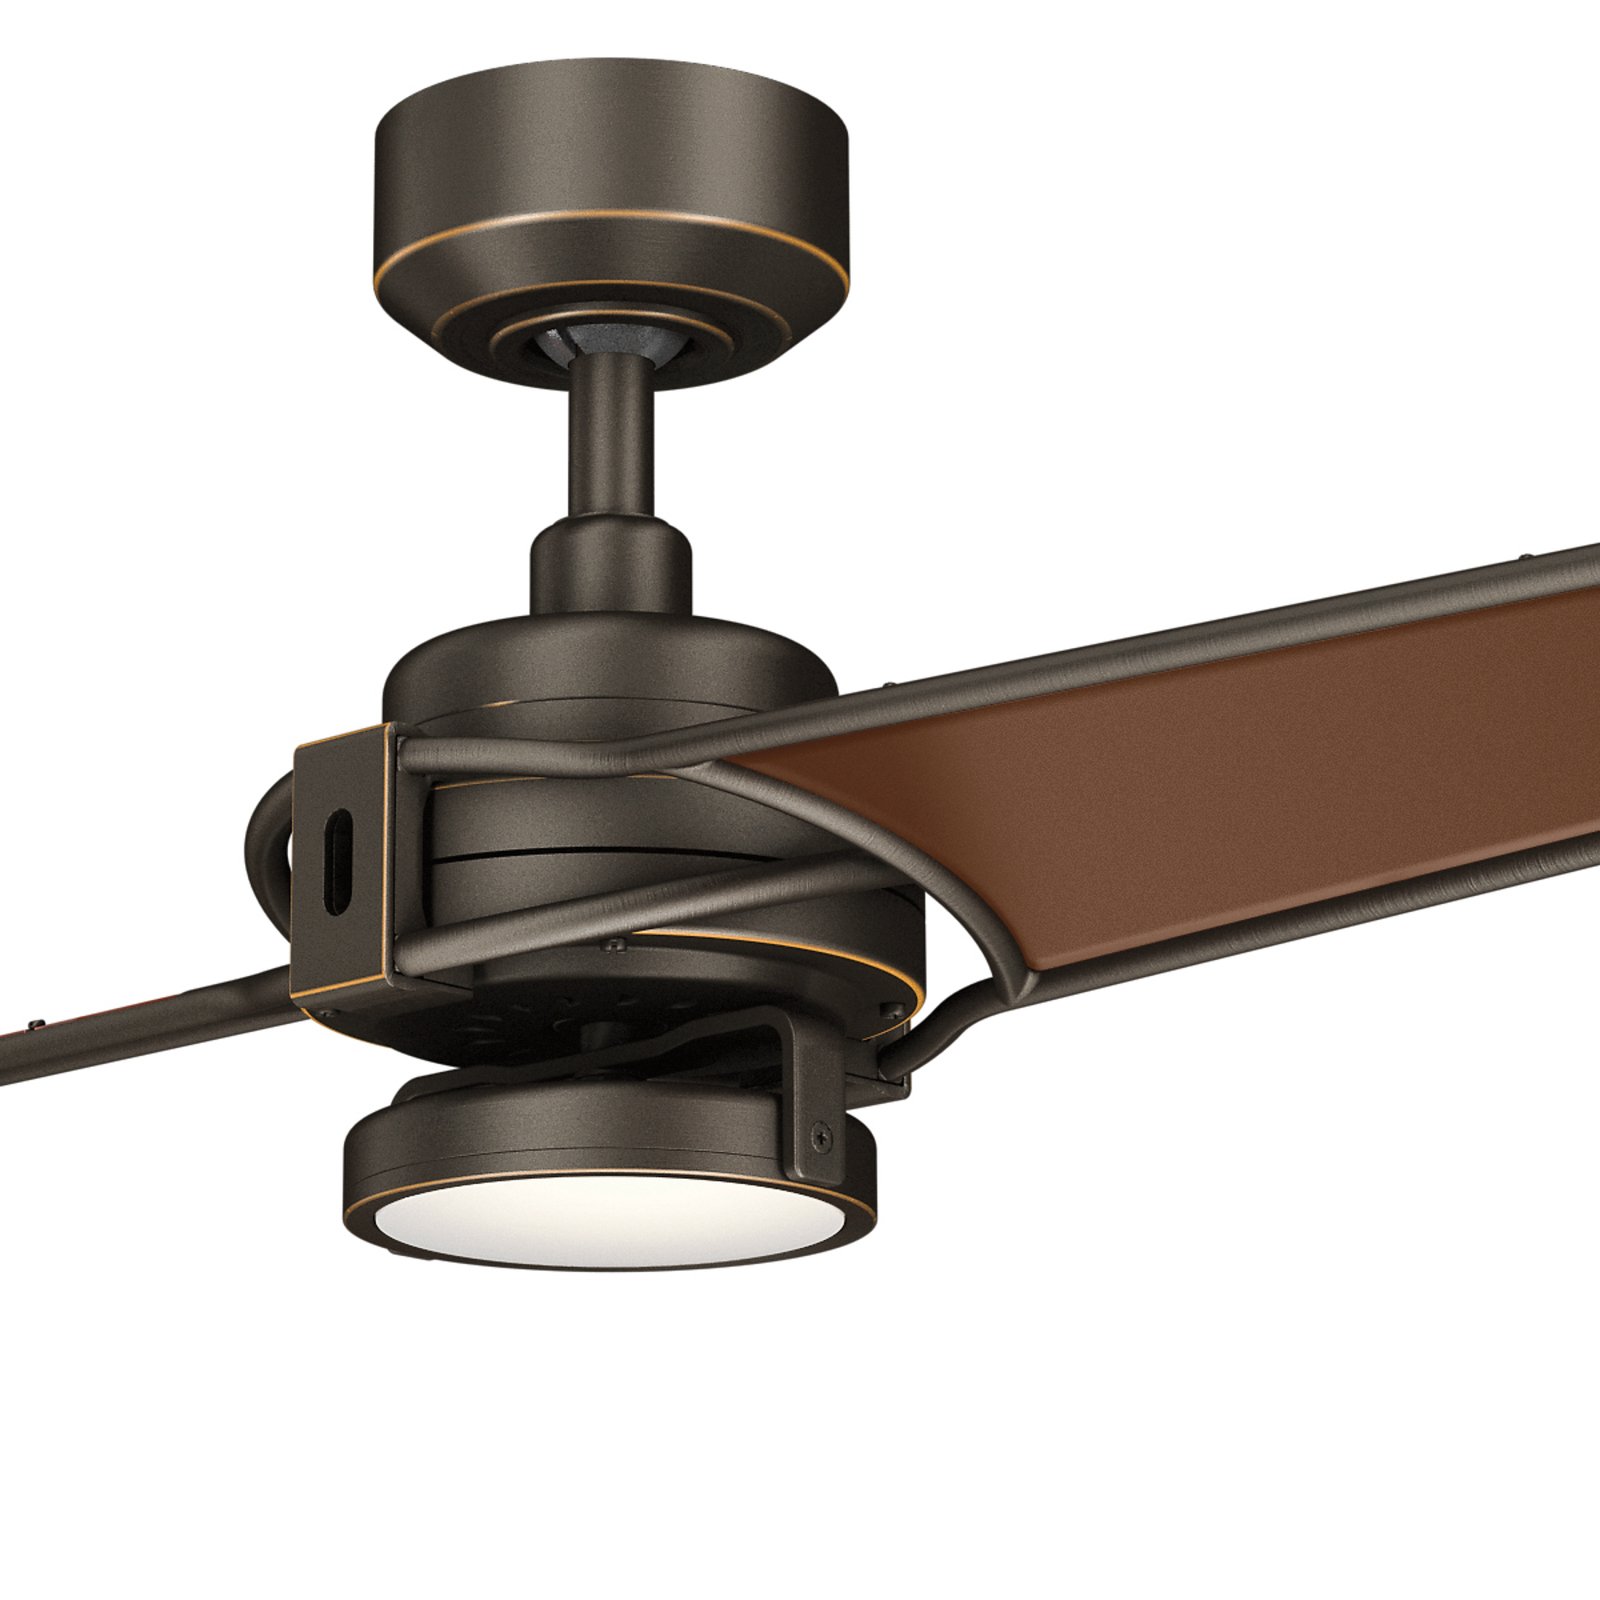 Xety LED ceiling fan, brushed, oiled bronze